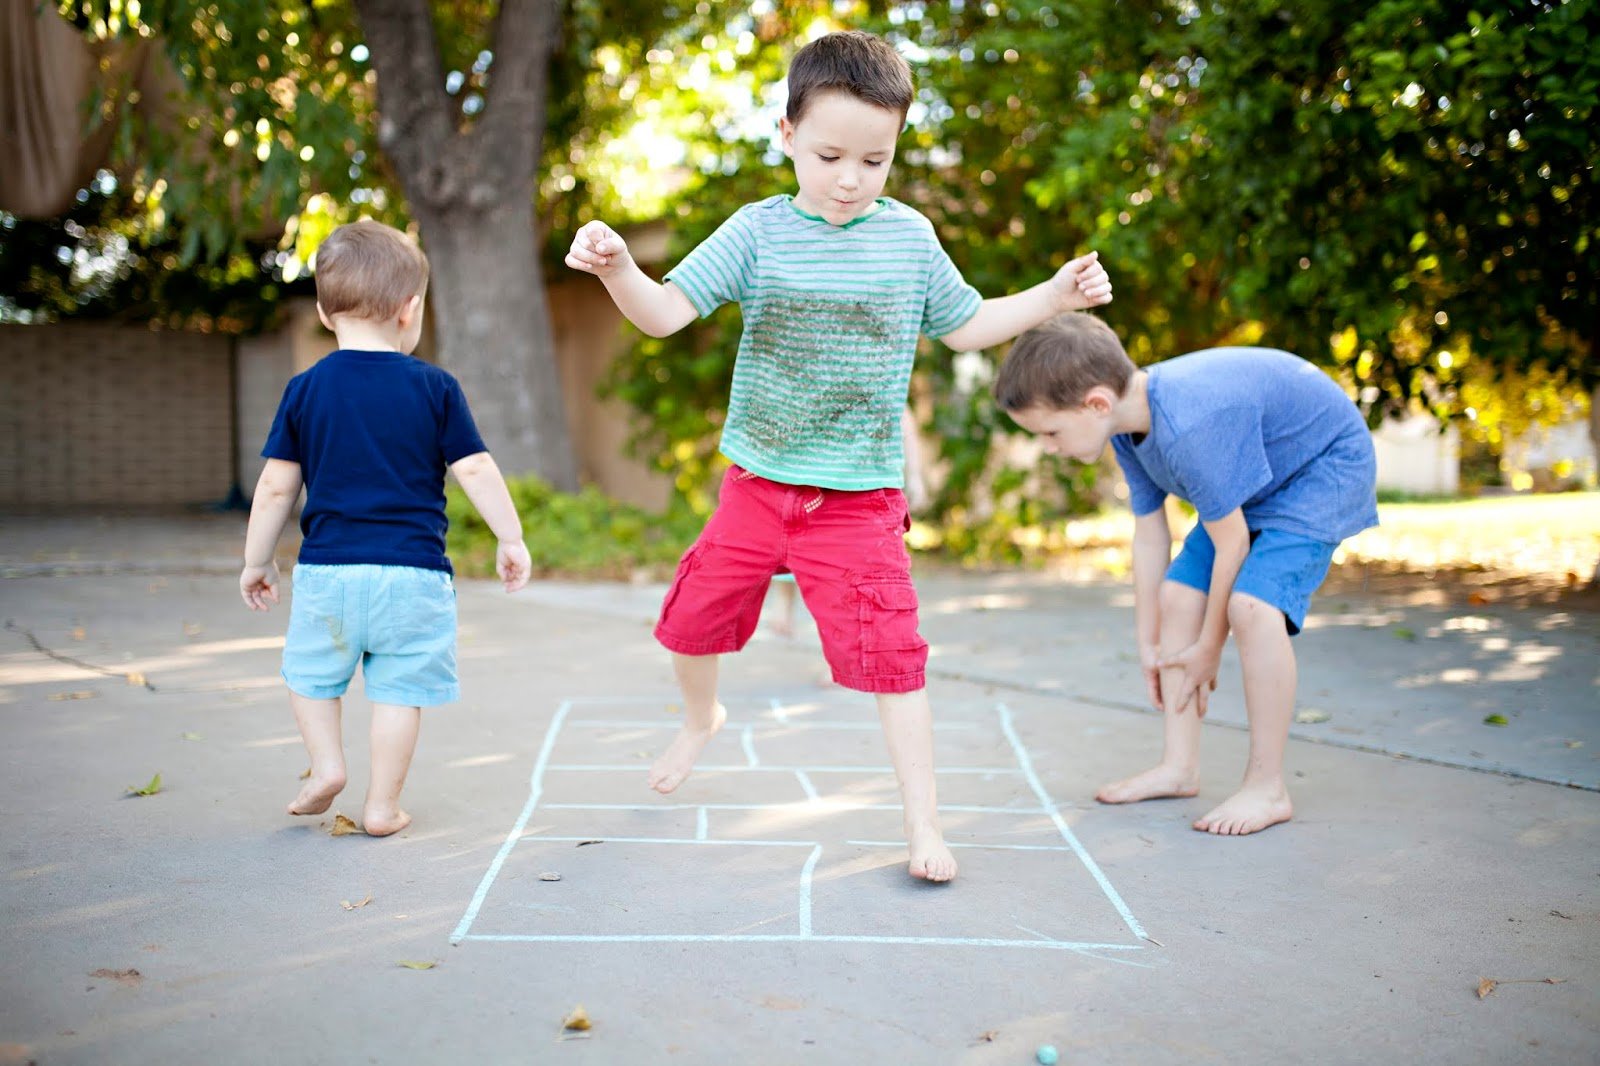 Playing games increases children's self-confidence #1